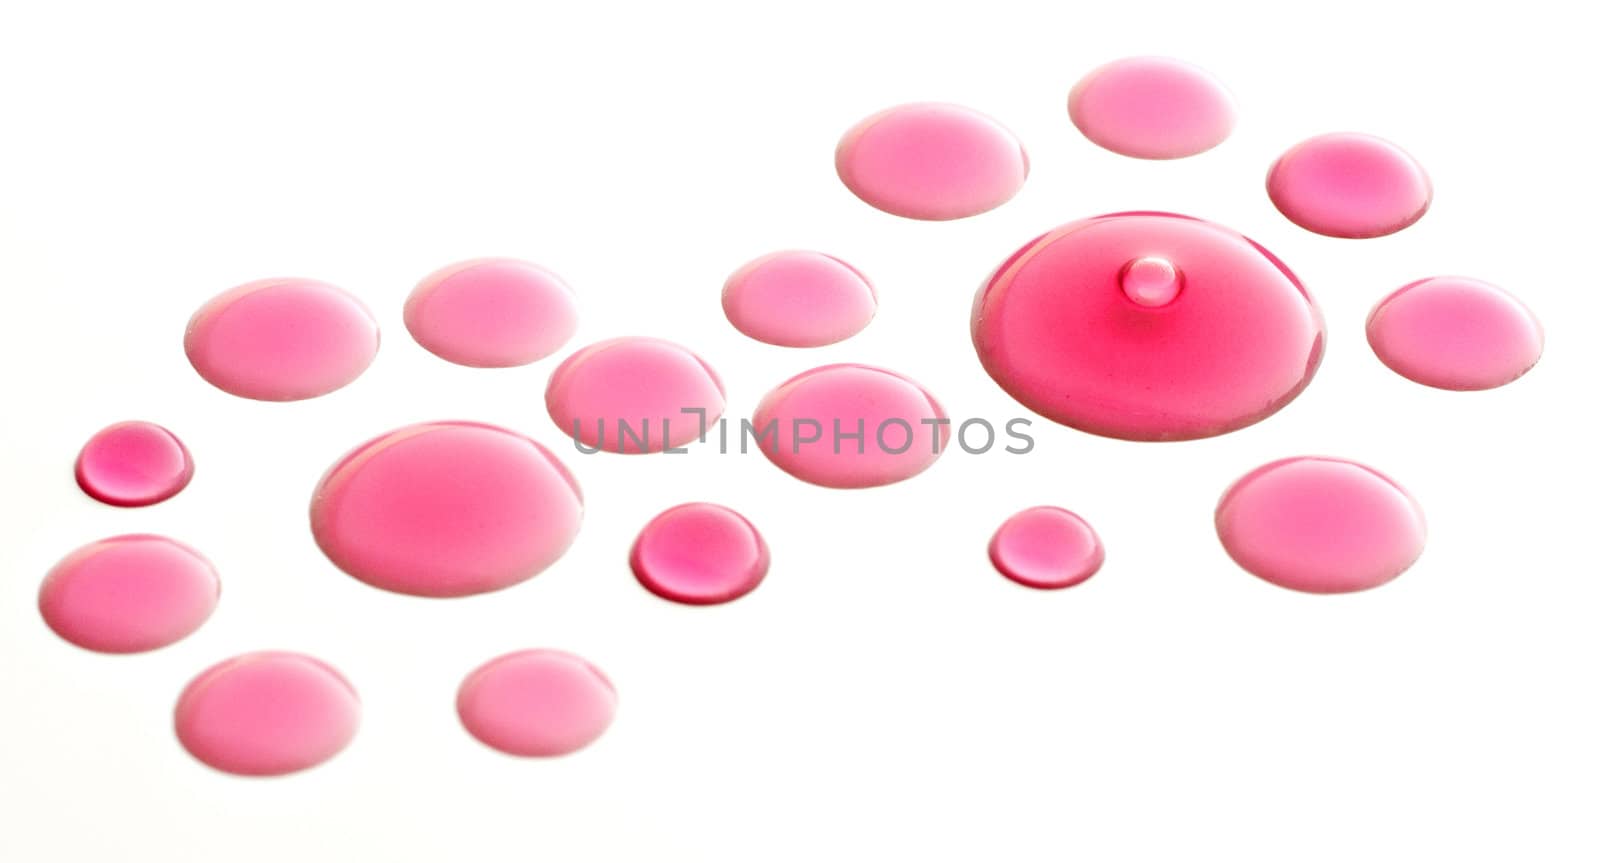 Pink water drops can be used as a background